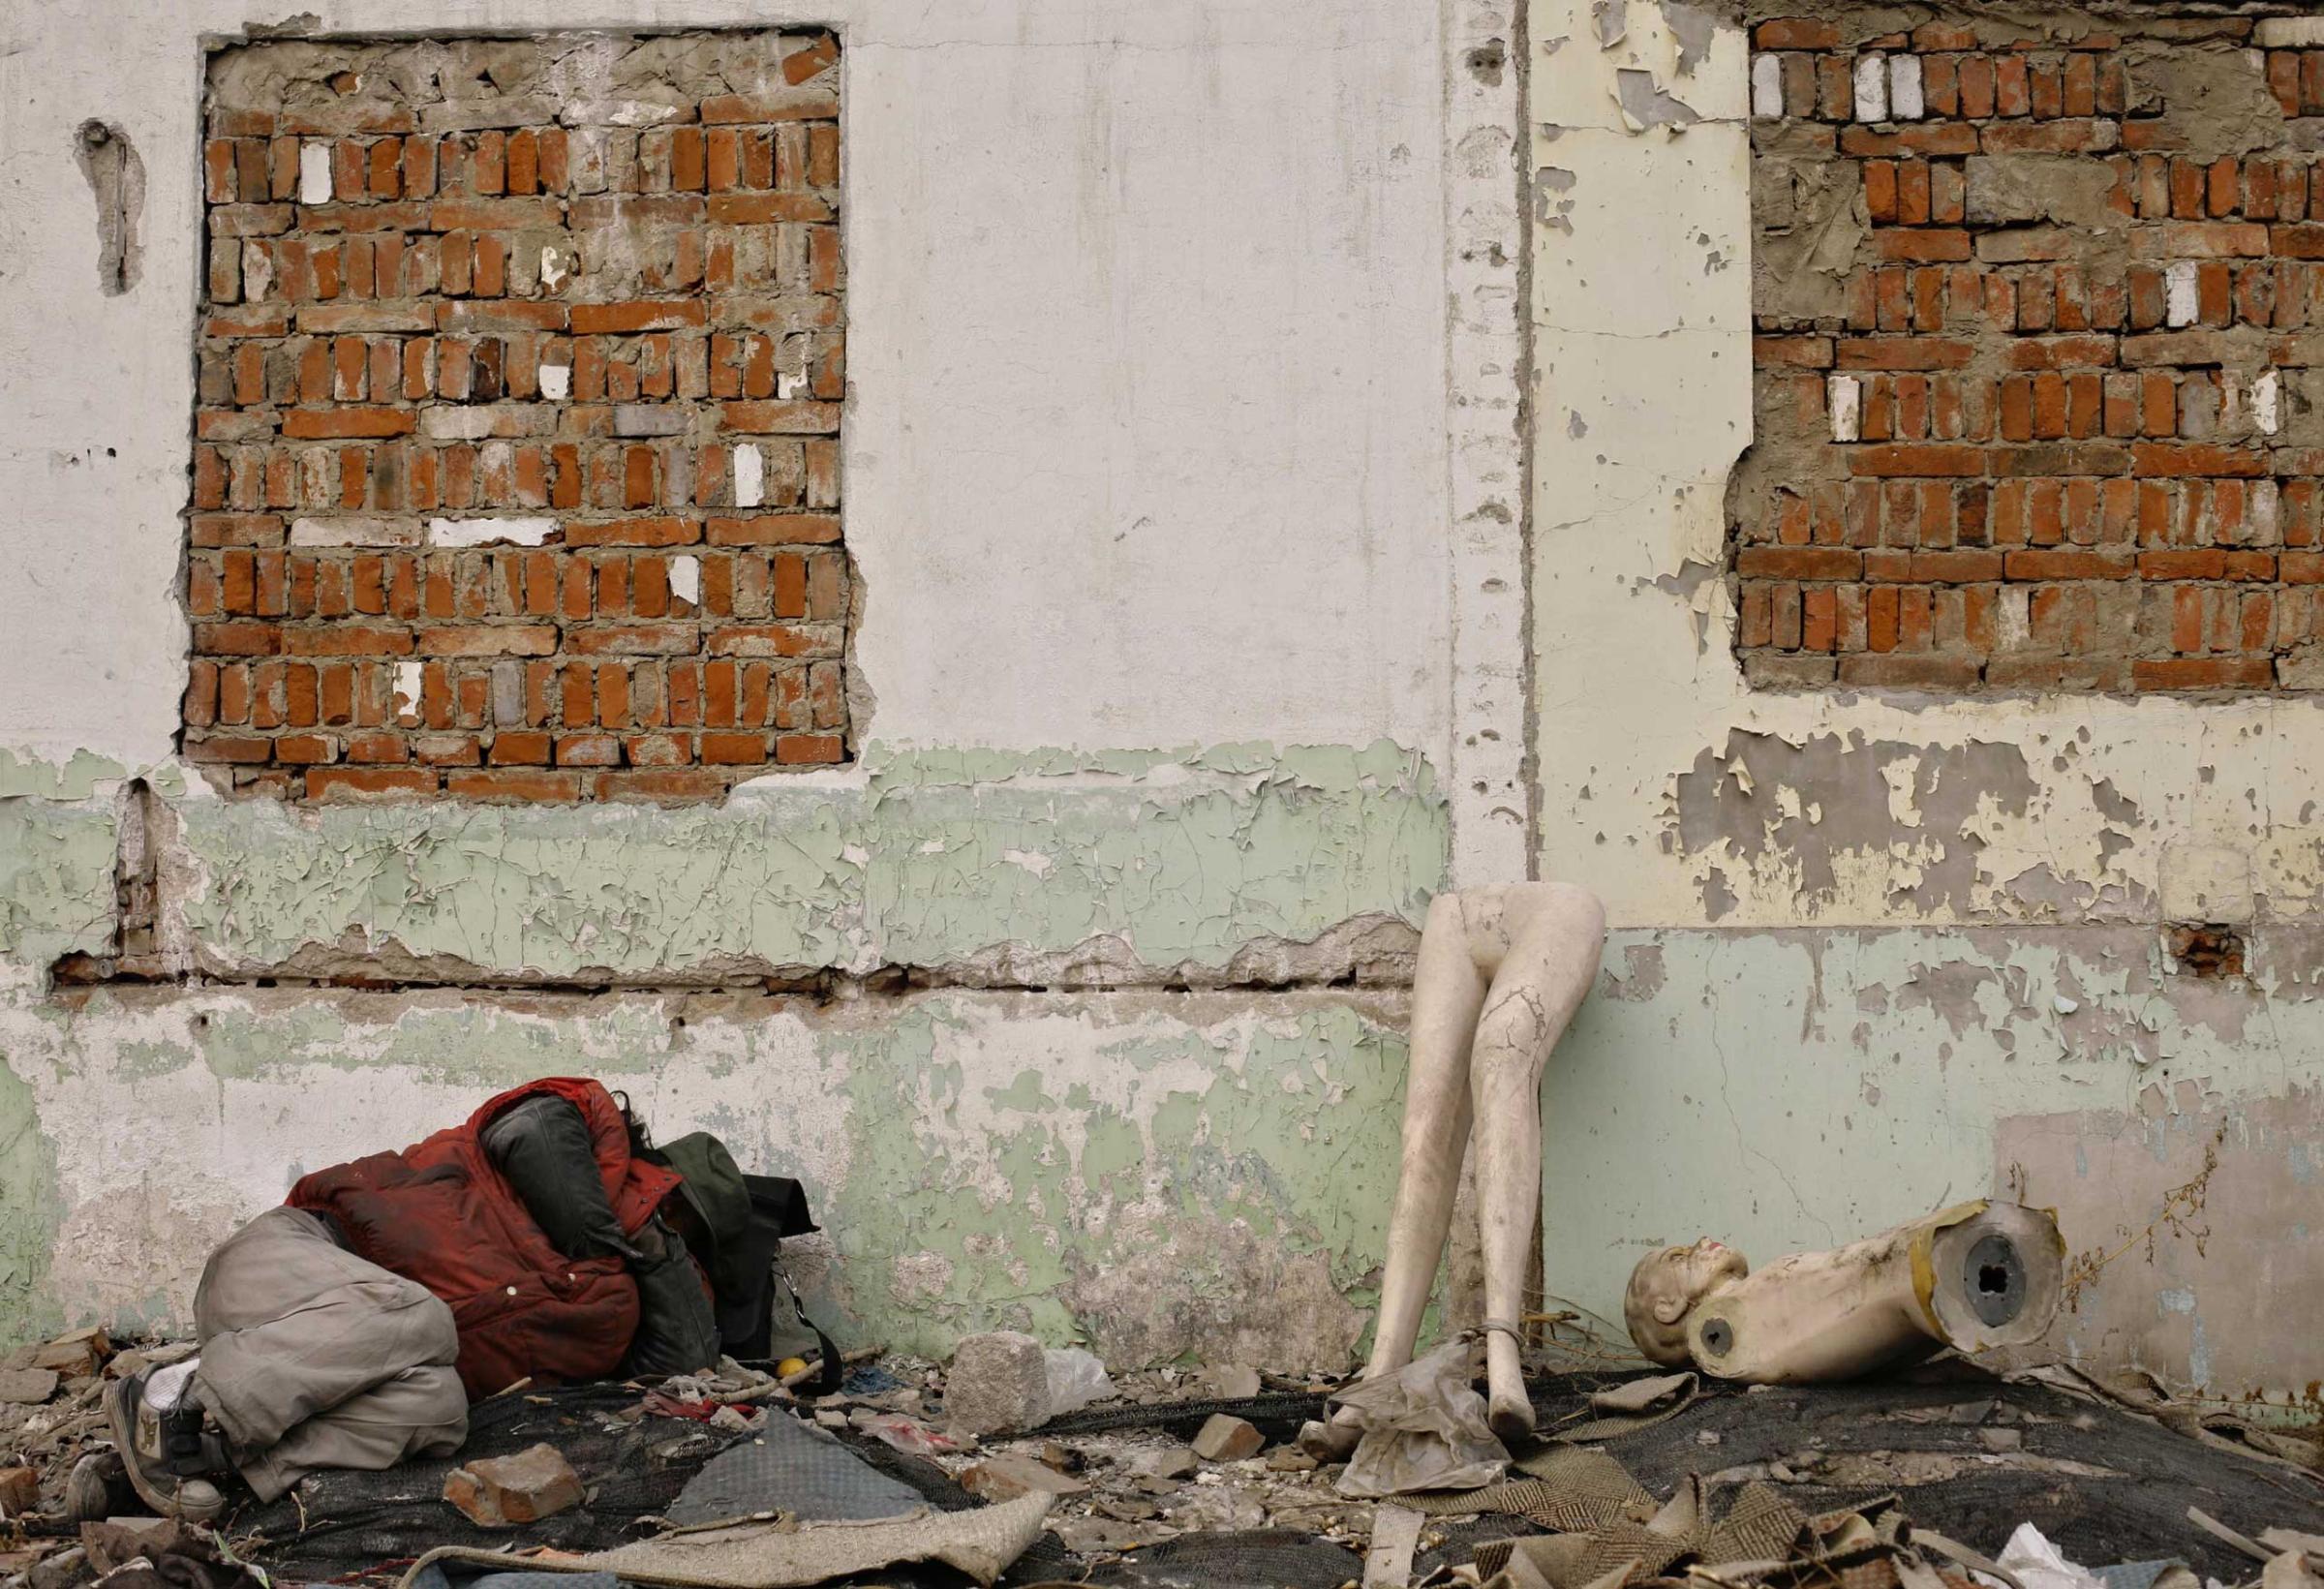 A man sleeps next to pieces of mannequins amongst the rubble of a demolished house in Beijing, Dec. 26, 2007.